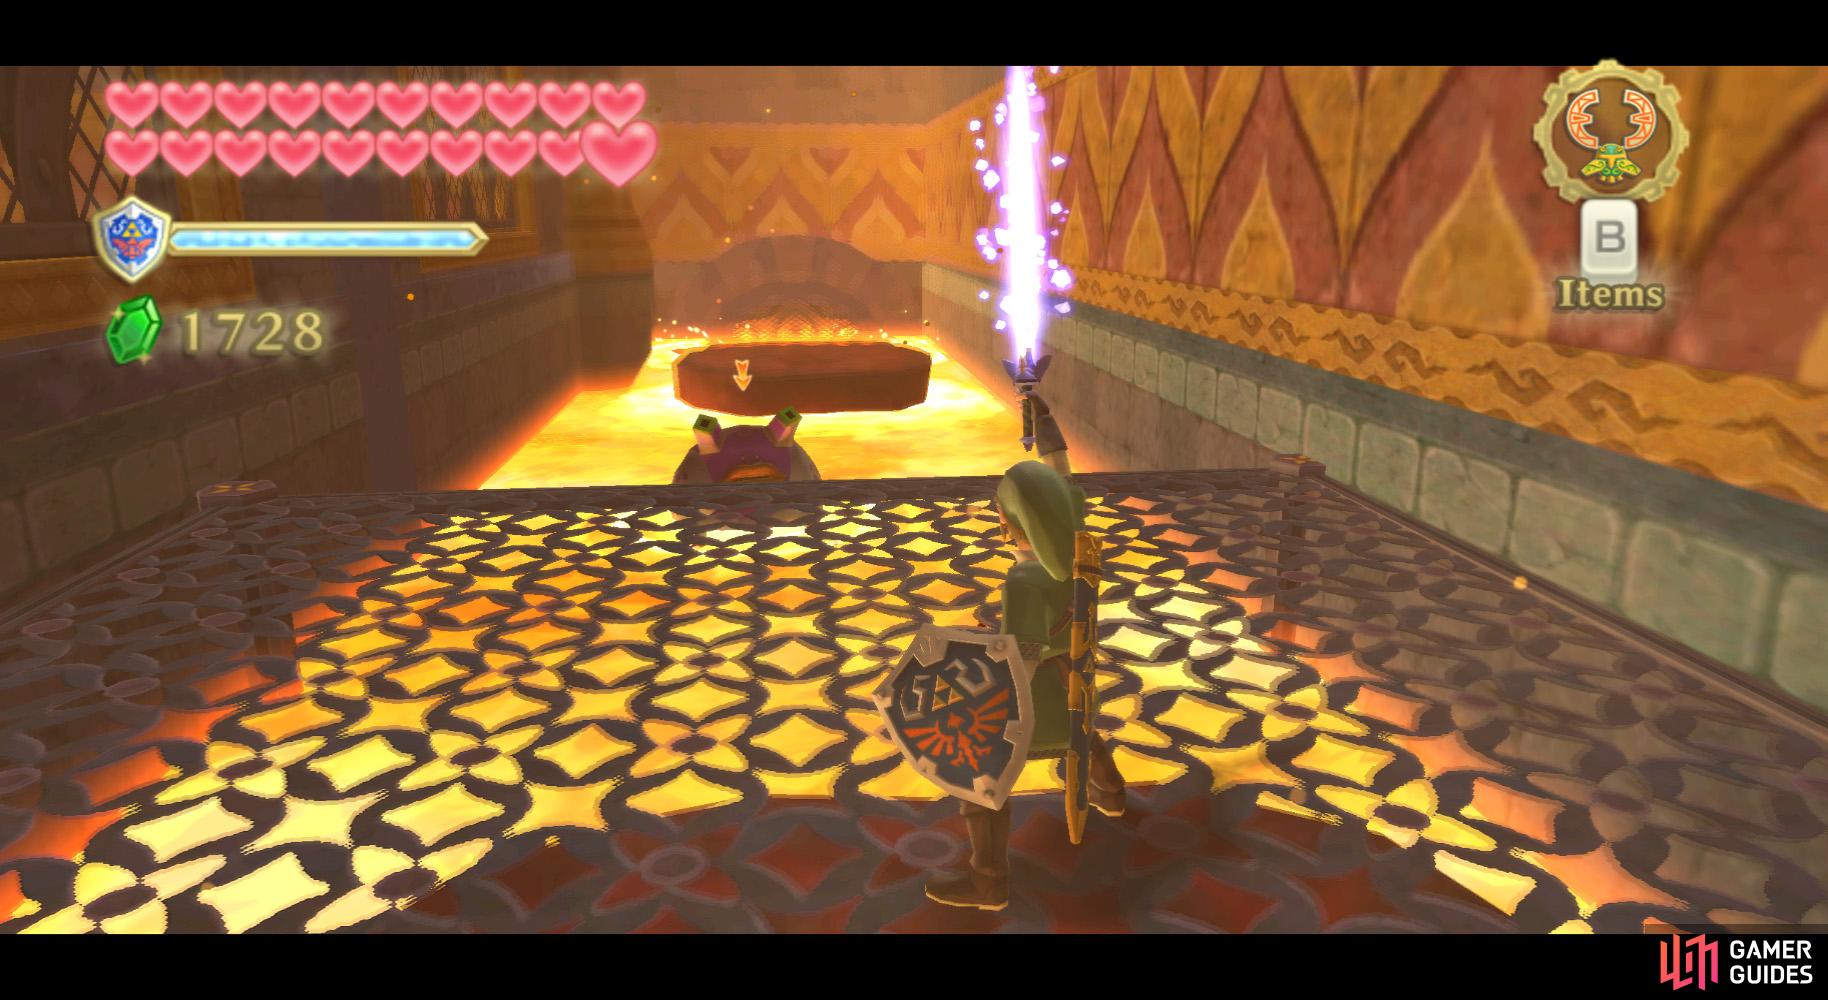 The Skyward Strikes from the True Master Sword charge fast and hit hard.